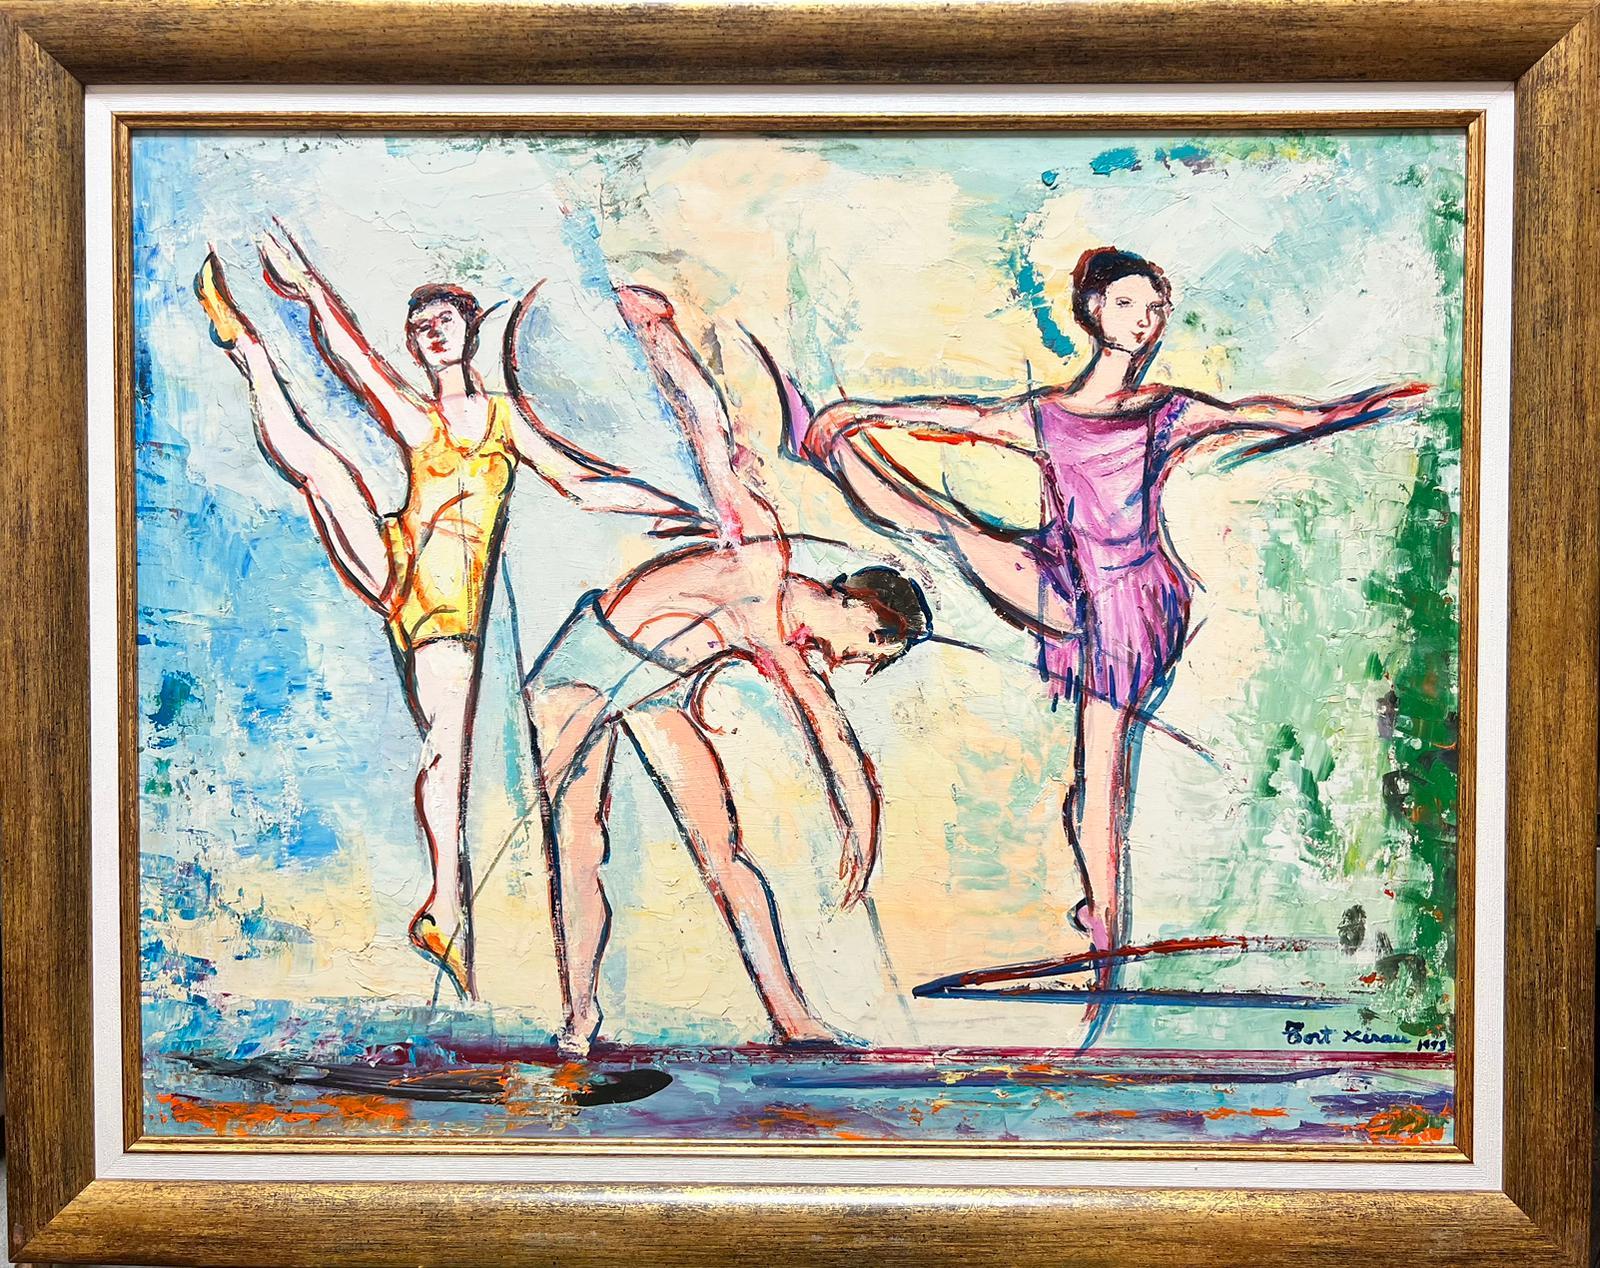 The Ballerinas
by Maria Tort Xirau (Catalan, 1924-2018)
signed lower corner
oil painting on board, framed

framed: 23.5 x 29.5 inches
board: 21.5 x 28 inches

Very good condition. 

Provenance: private collection

Maria Tort Xirau ( Figueres , 26